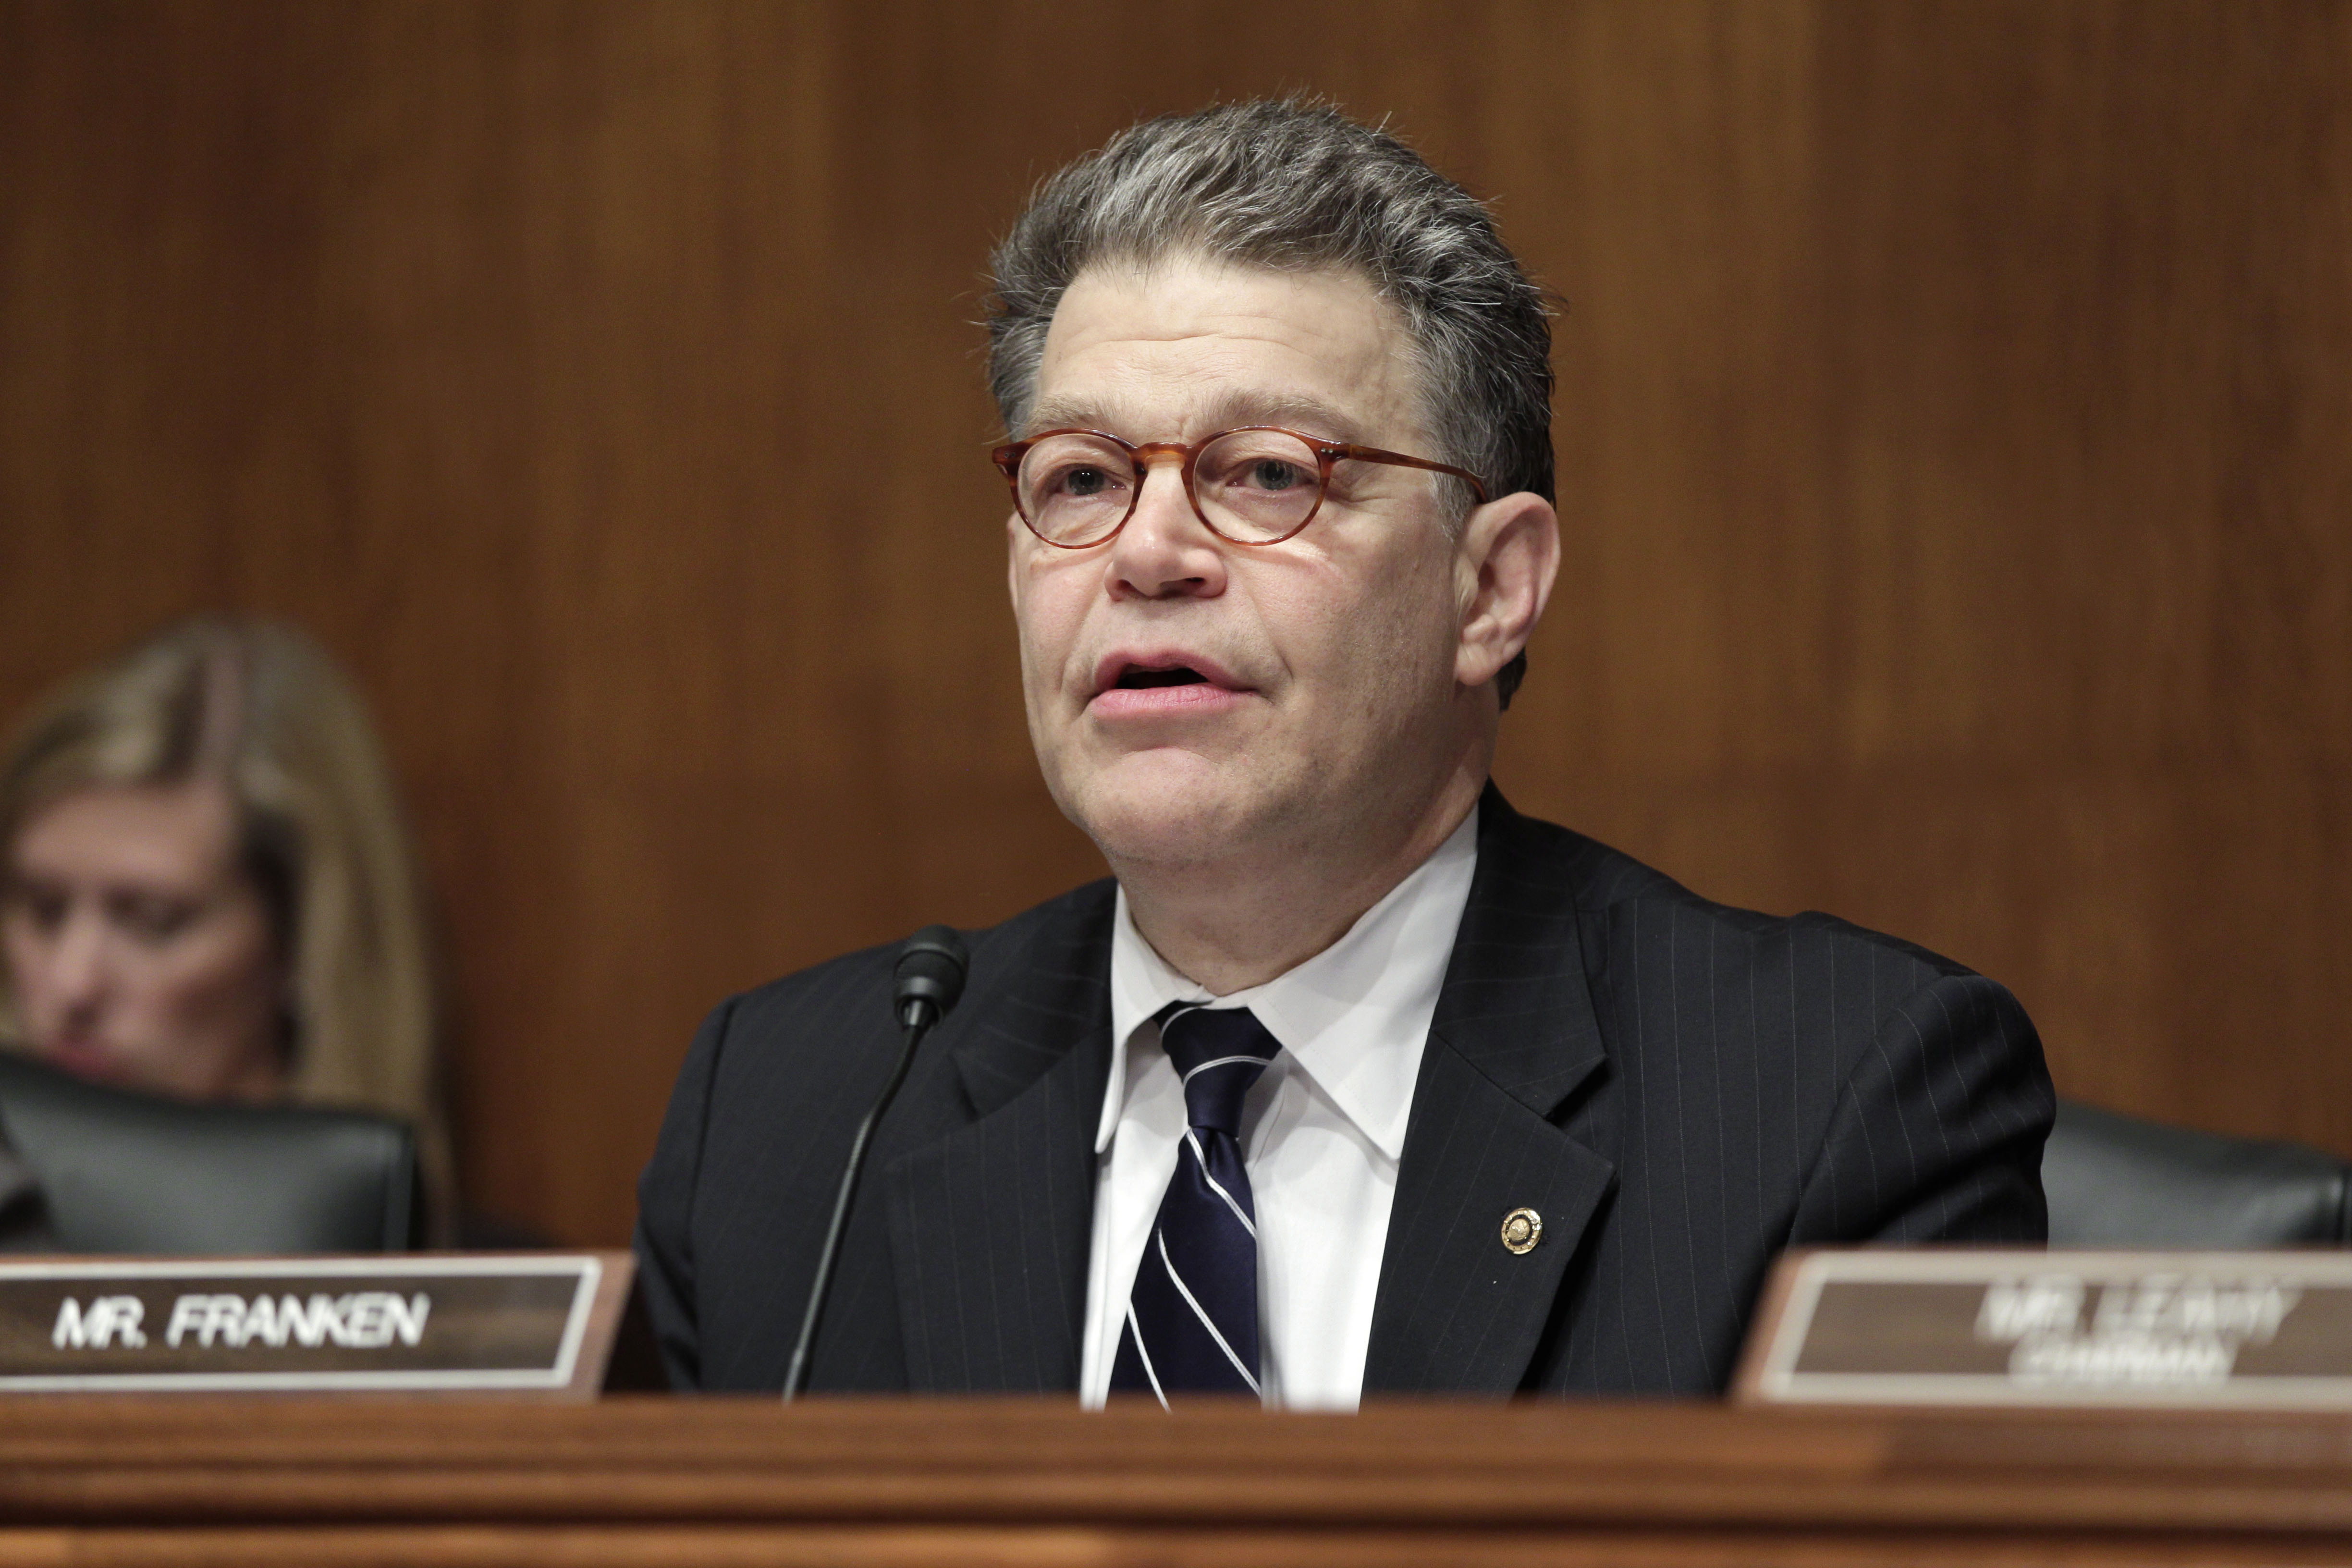 In this May 10, 2011, file photo, Senate Privacy, Technology and the Law subcommittee Chairman Sen. Al Franken, D-Minn. presides over the subcommittee's hearing on "Protecting Mobile Privacy: Your Smartphones, Tablets, Cell Phones and Your Privacy," on Capitol Hill in Washington. (AP Photo/J. Scott Applewhite, File)